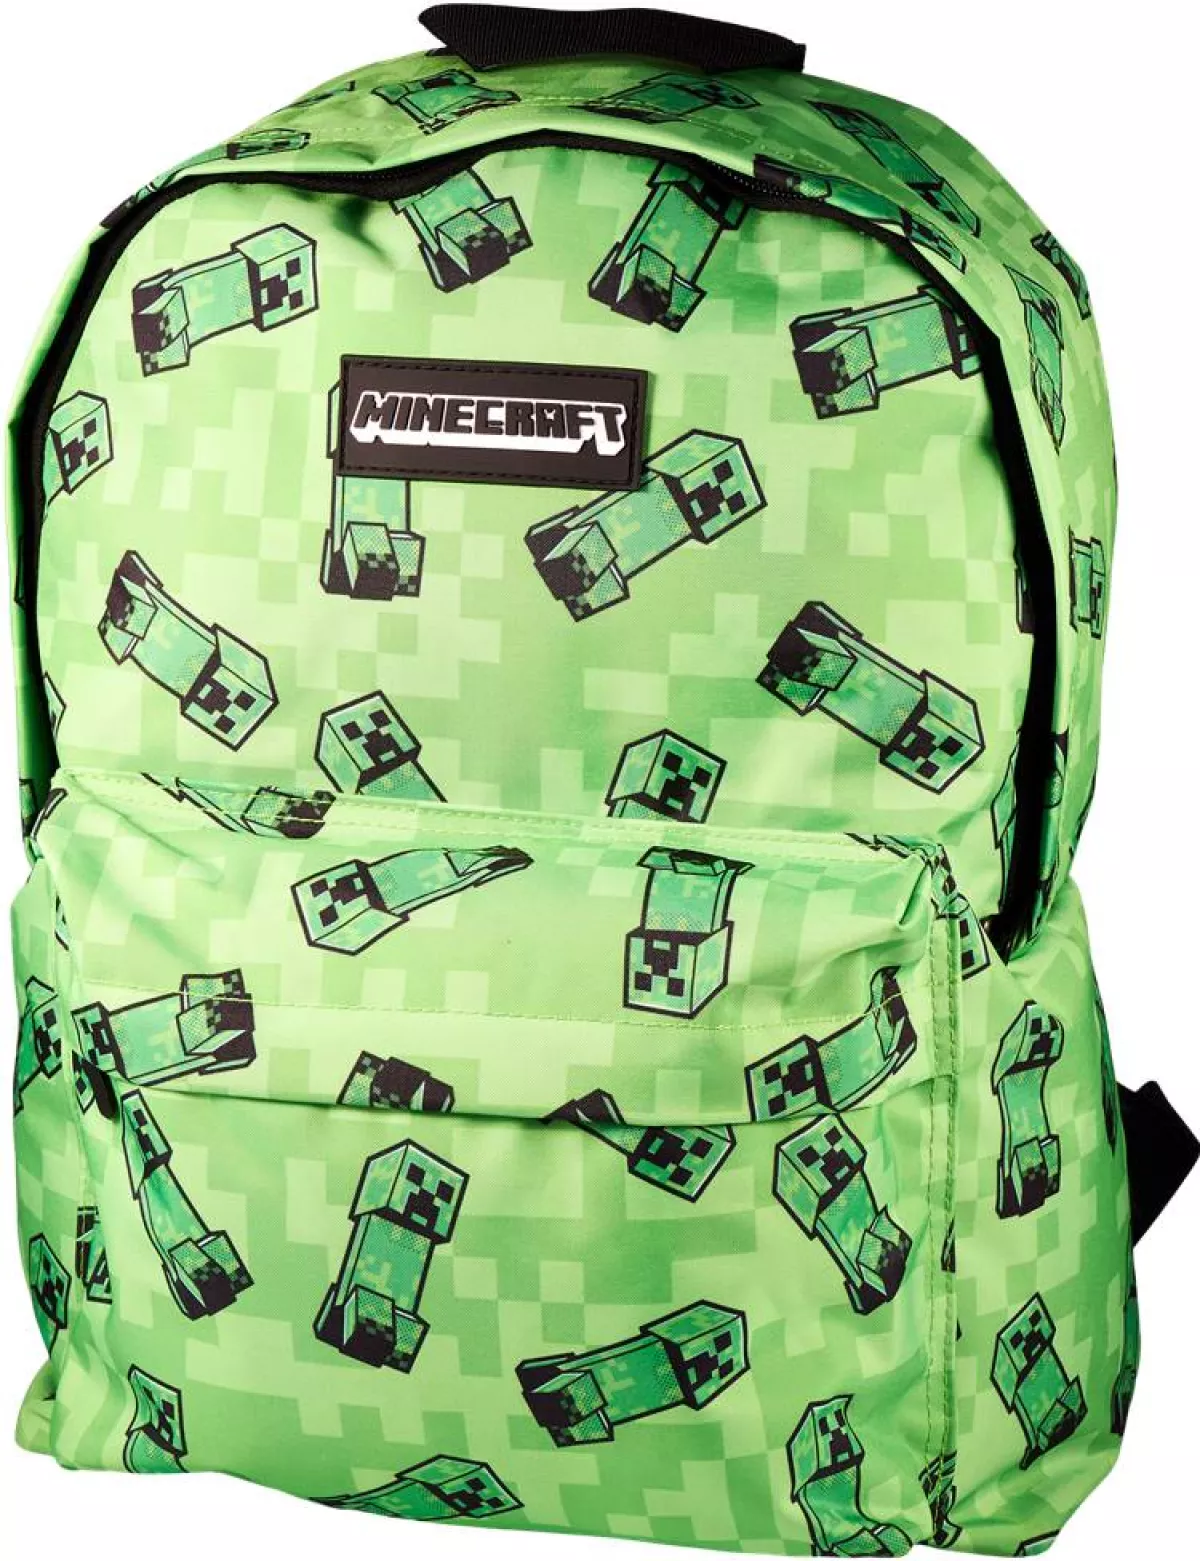 #1 - Euromic - Minecraft - Backpack (0614090-4483117)